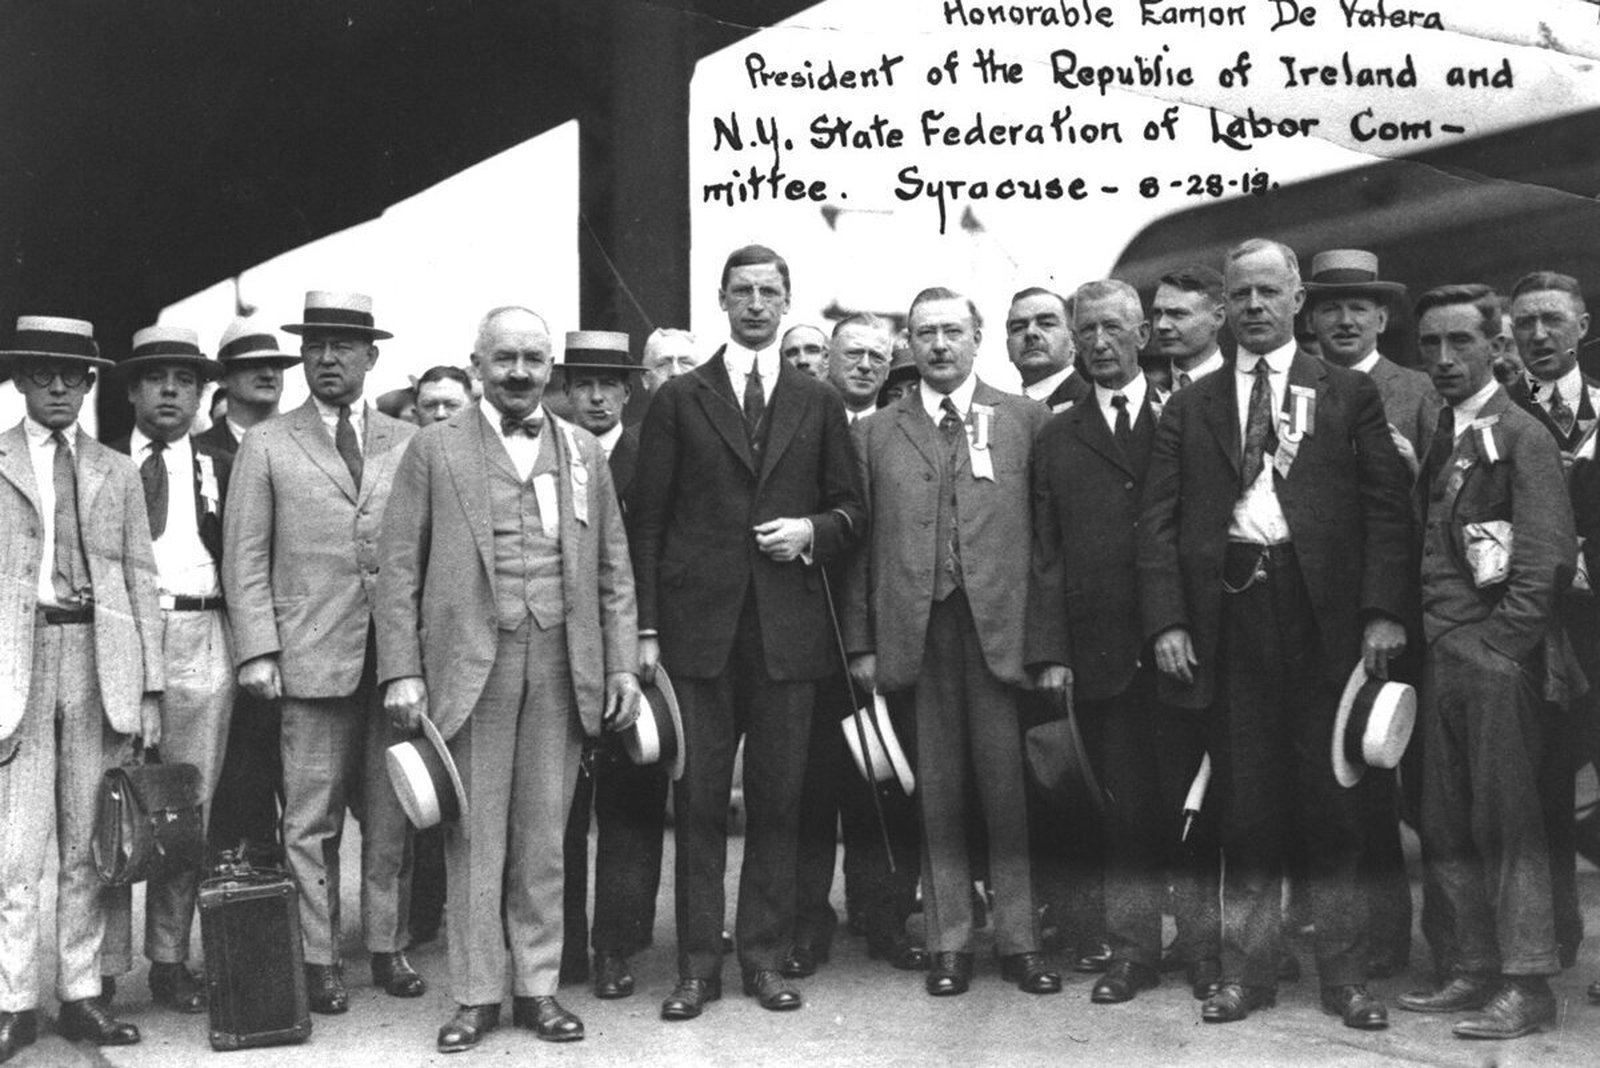 Image - Éamon de Valera and the New York State Federation of Labour Committee, at Syracuse New York, 28/8/19